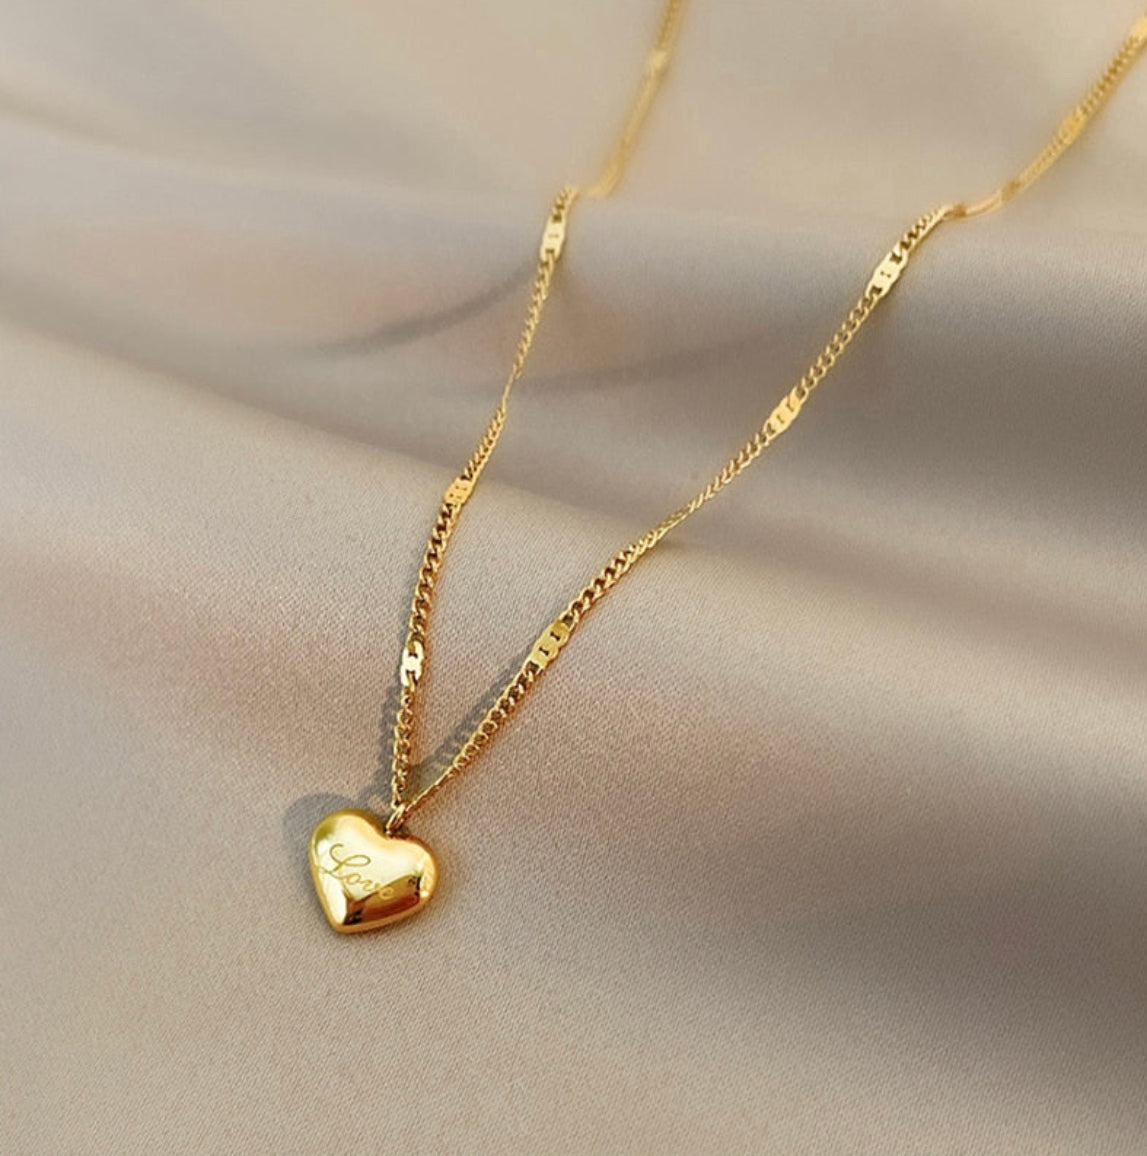 Puffed Heart 'Love' Necklace